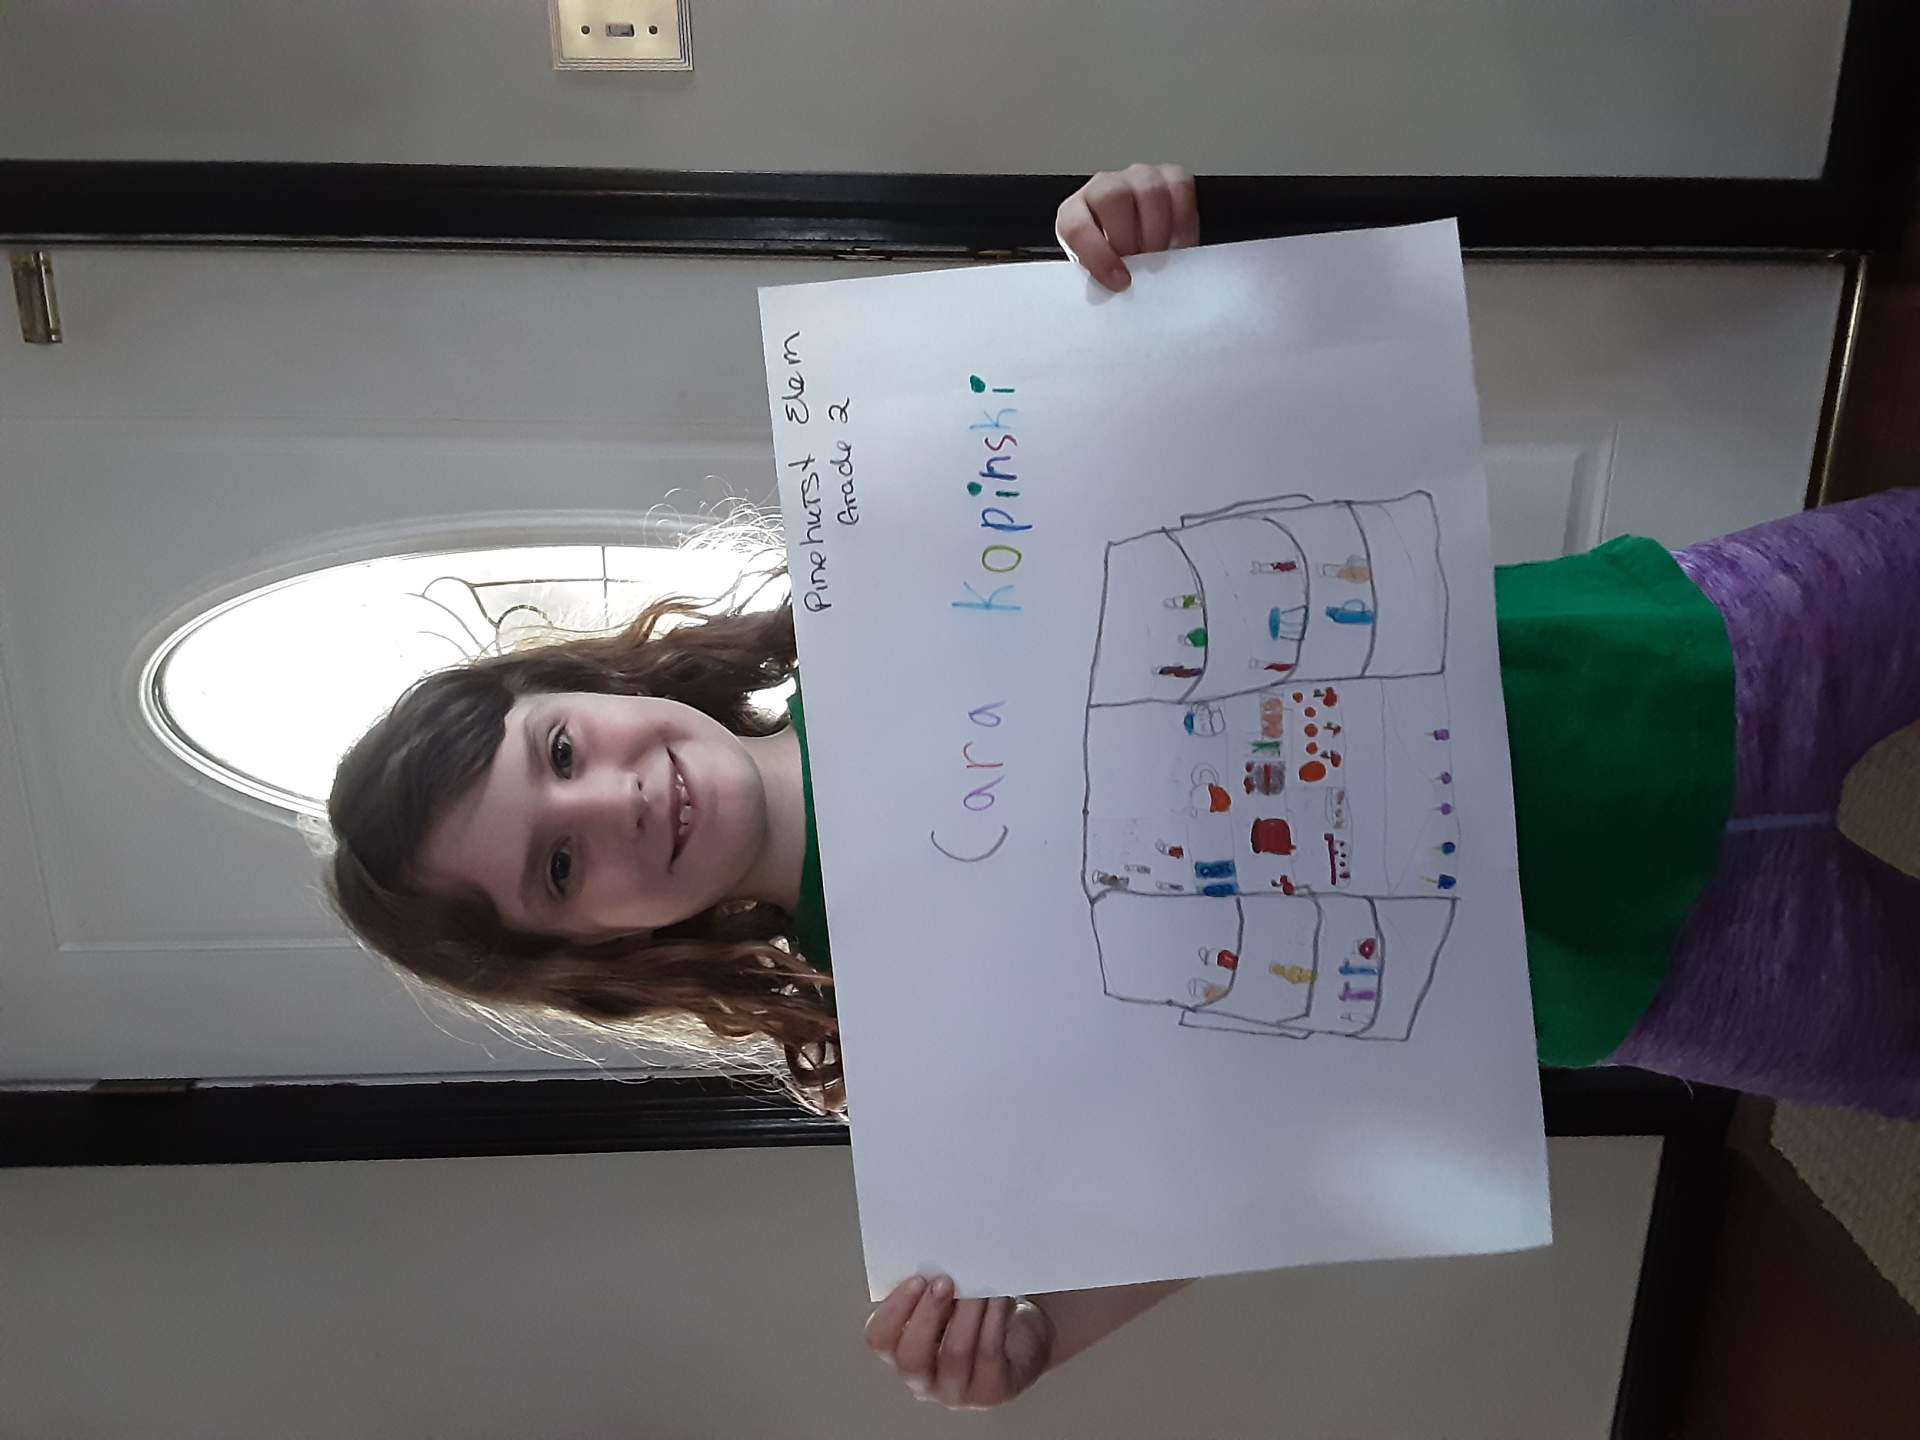 Cara with her drawing for "What's in Your Fridge?"